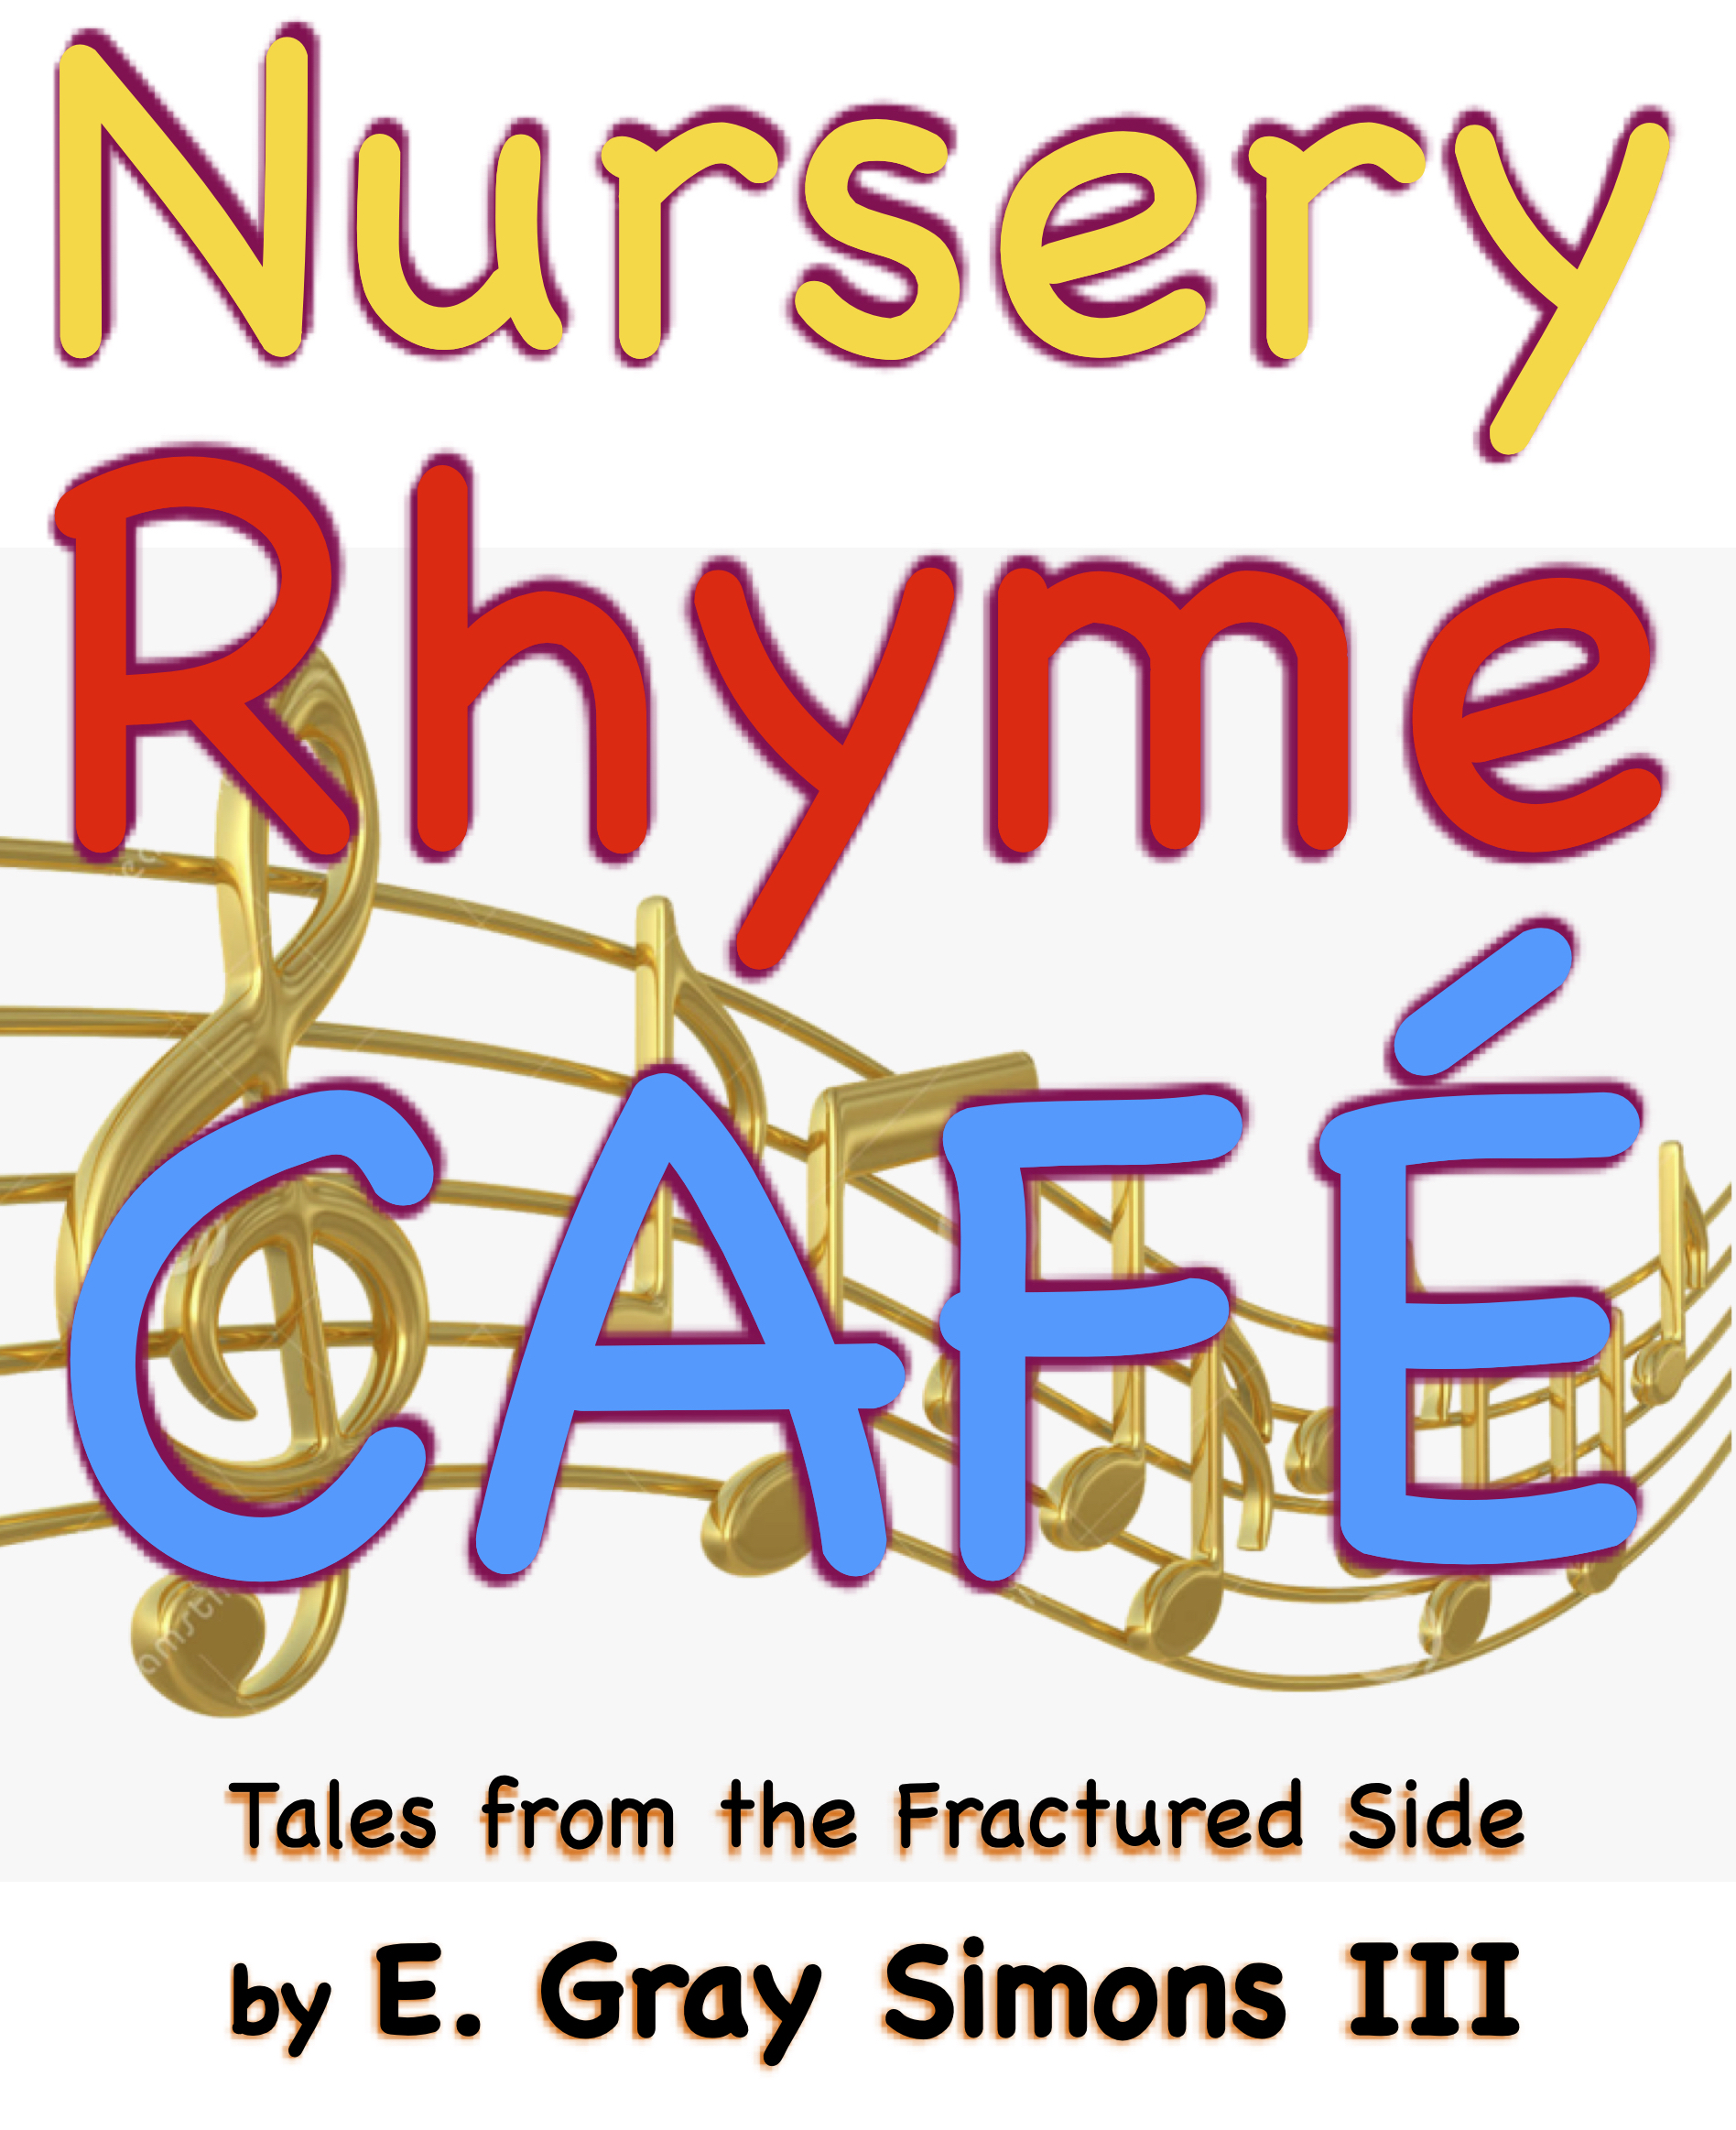 Nursery Rhyme Café • A Play With Songs • Tales from the Fractured Side